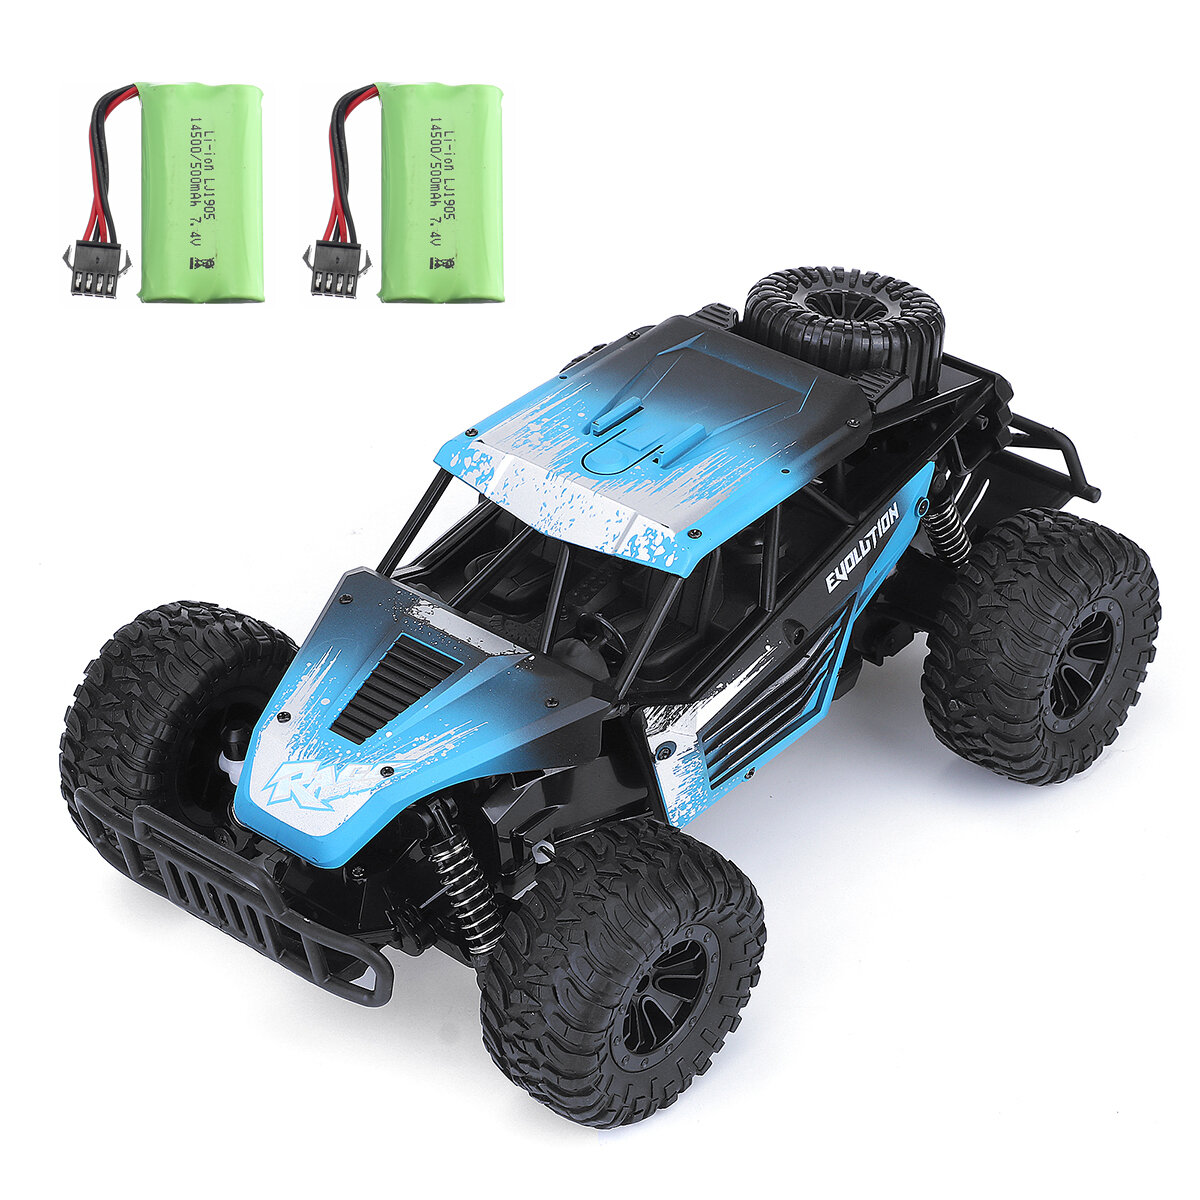 EACHINE EC16 1/16 RC Off Road Truck 2WD Remote Control RC Car High Speed 45 Mins 2.4Ghz 20km/h All-Terrain Waterproof To